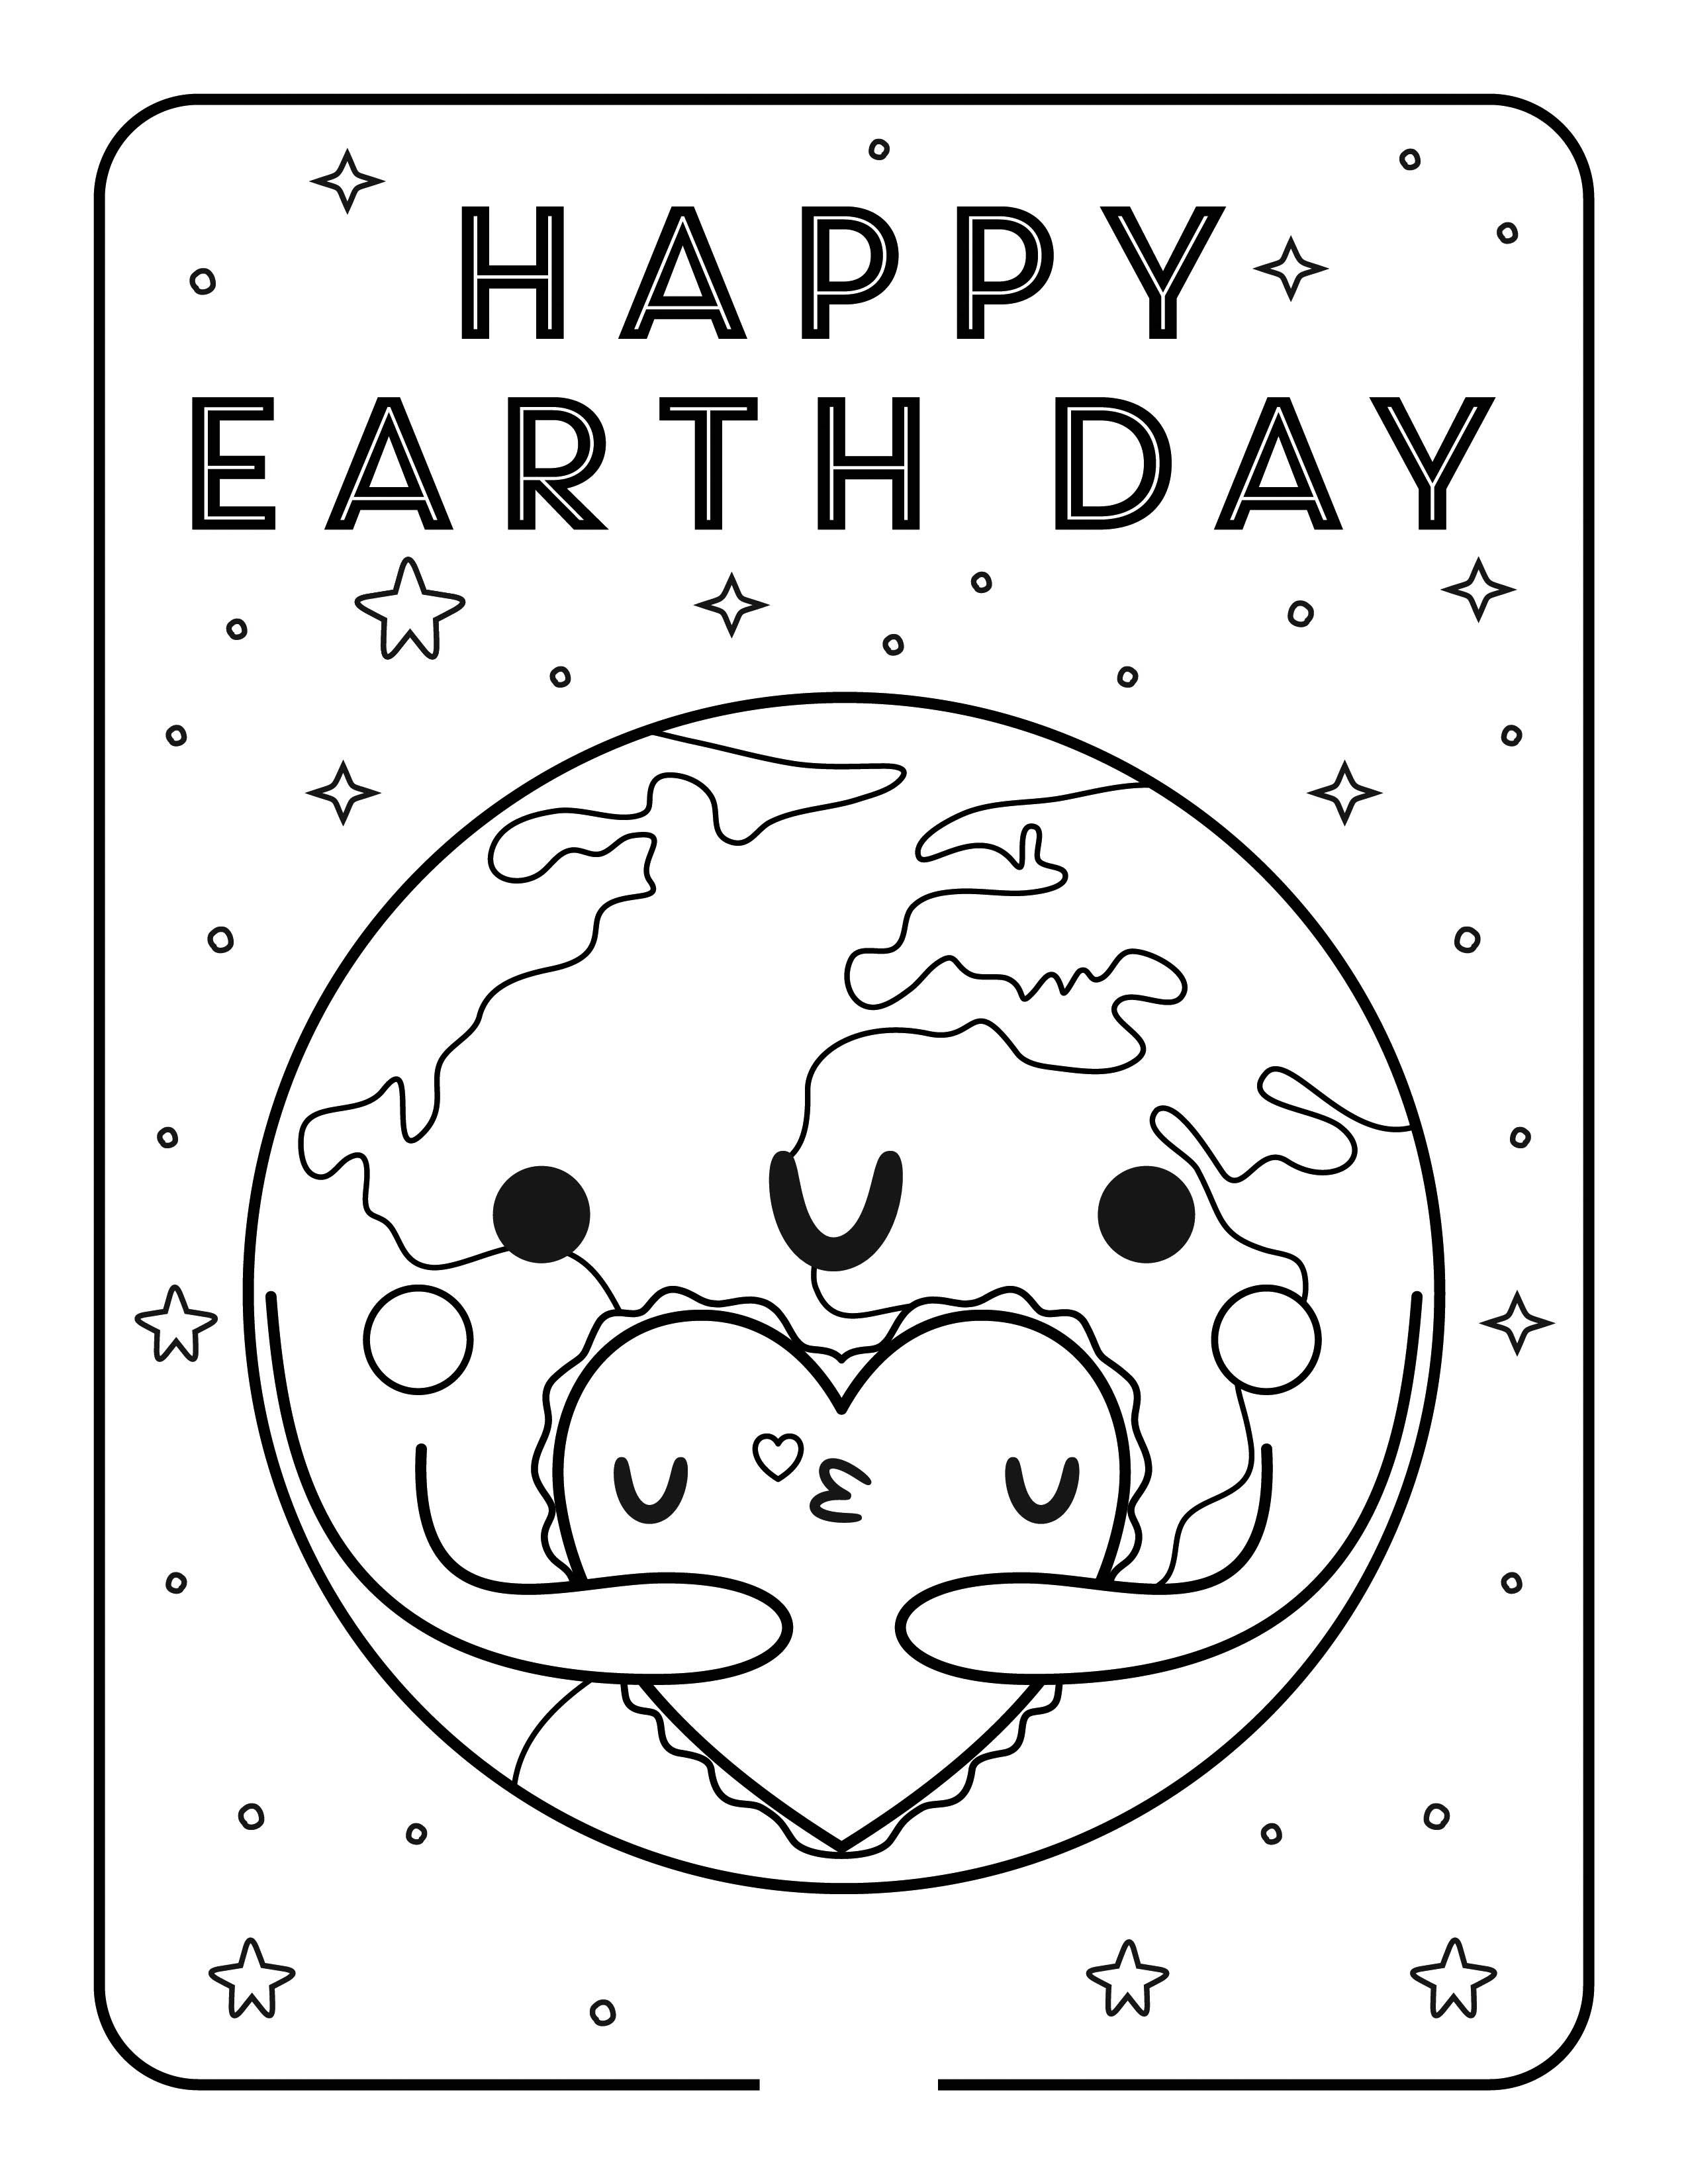 earth-day-coloring-pages-3